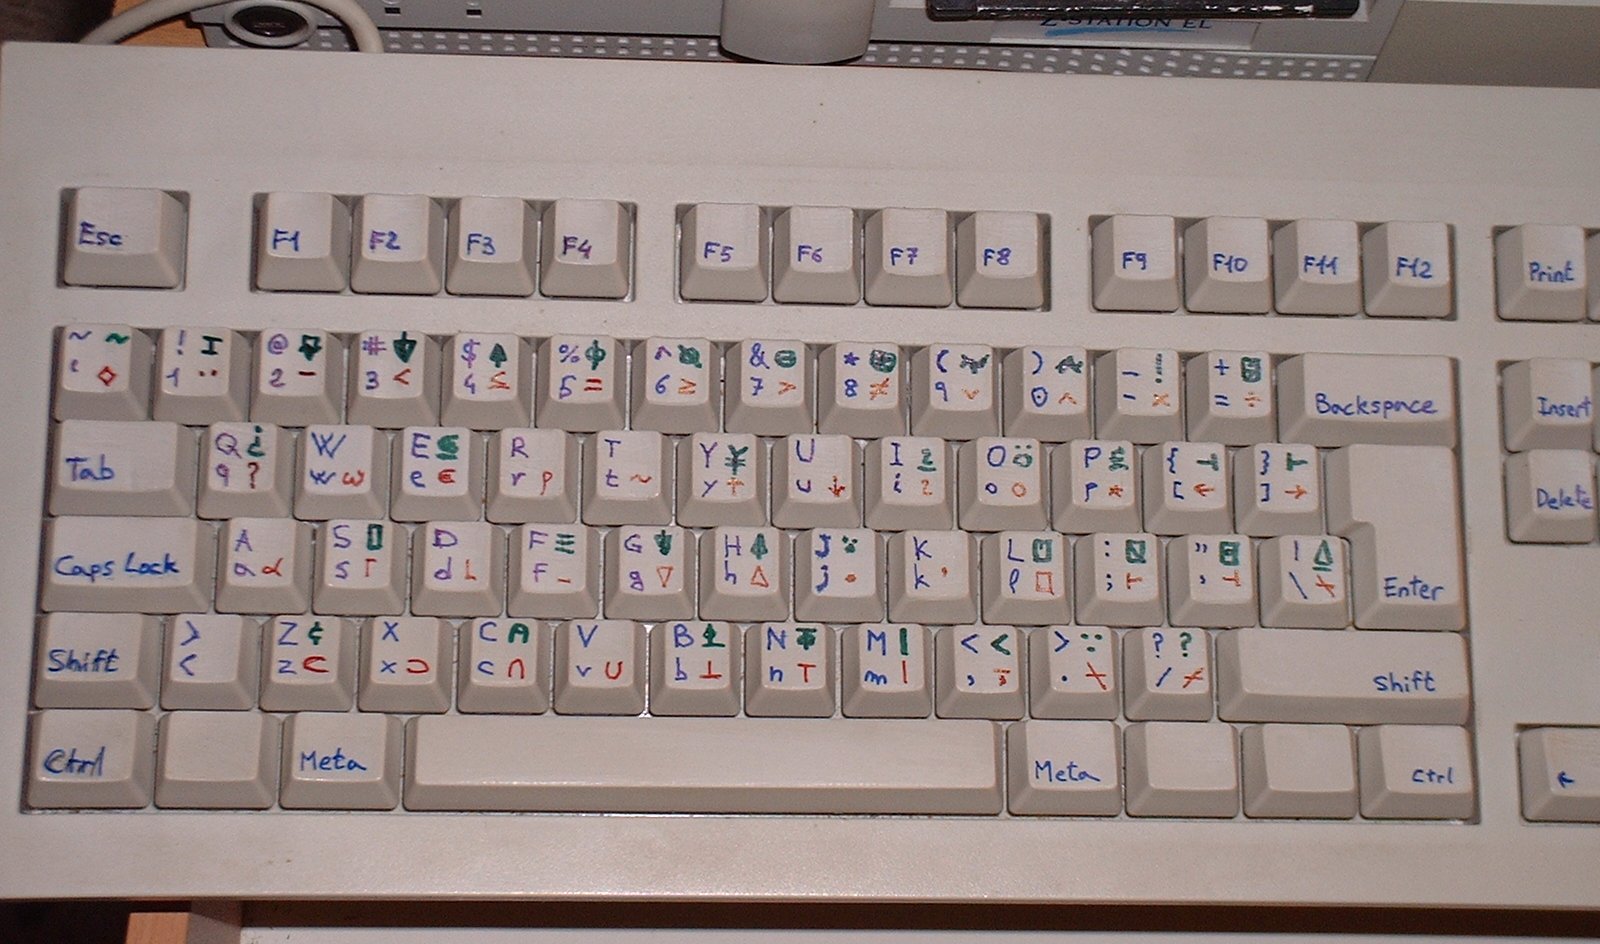 My hand-made APL keyboard from 2006, image 4 of 5